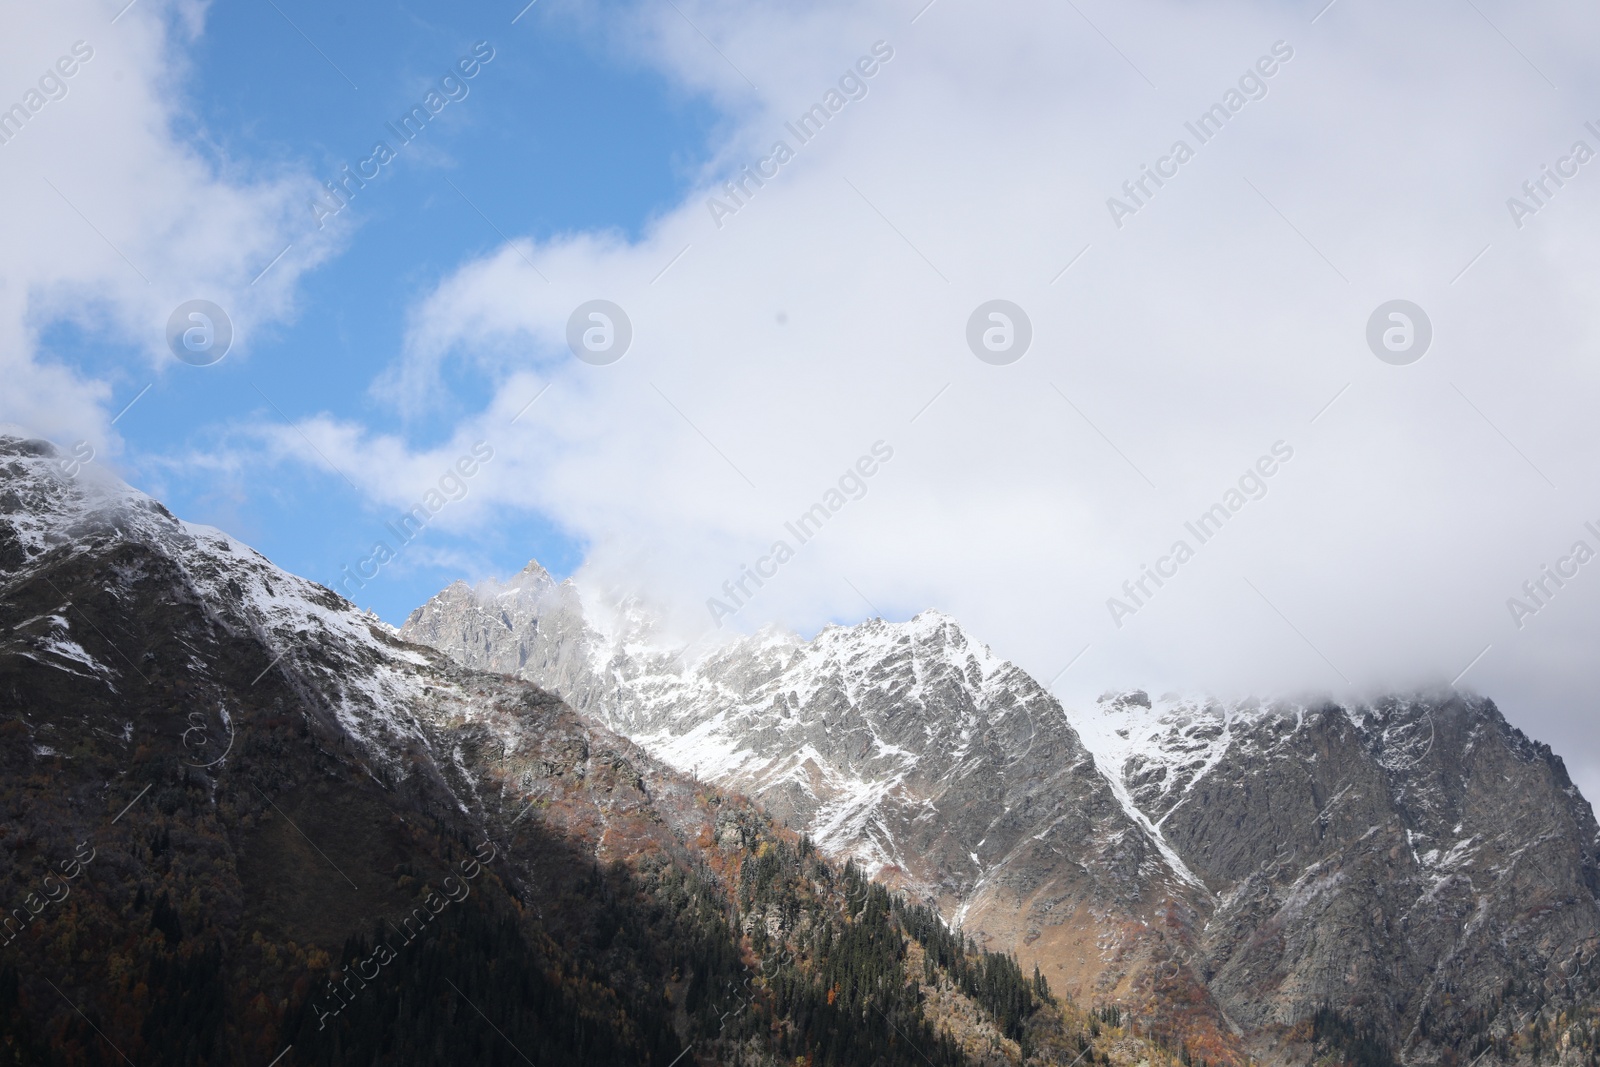 Photo of Picturesque view of high mountains under cloudy sky